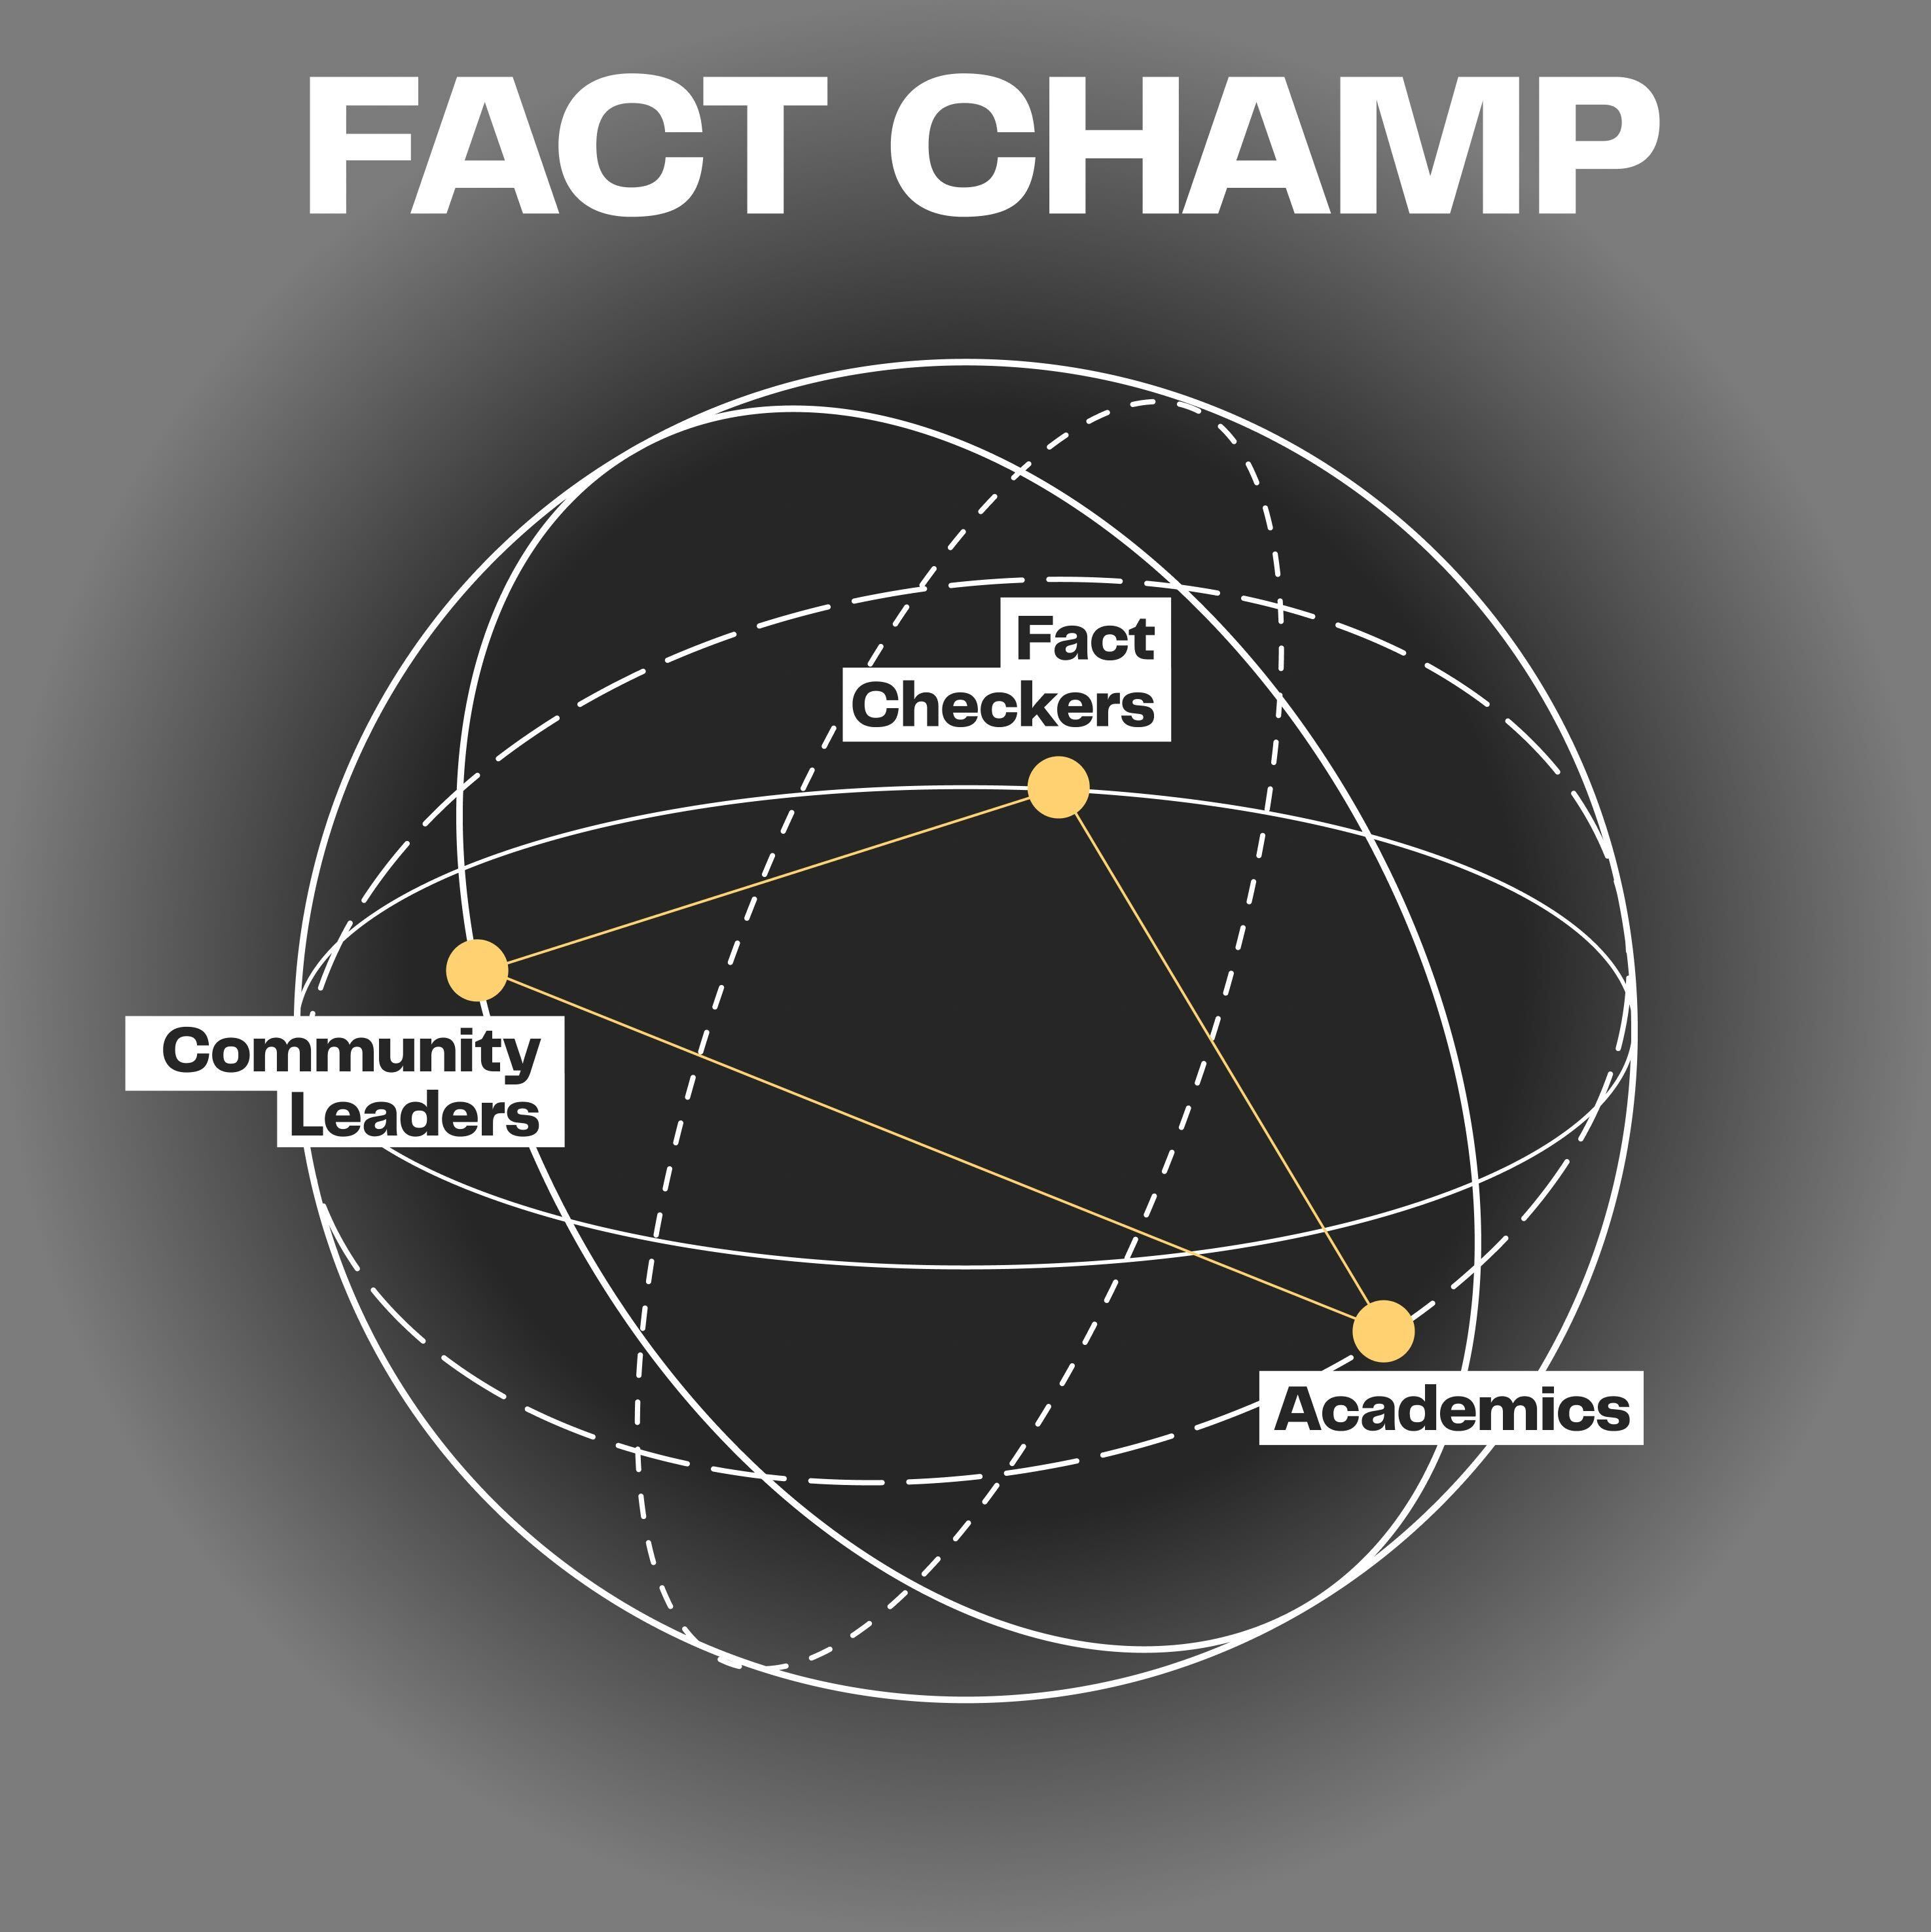 FACT CHAMP will create new collaboration infrastructure for academics, fact-checking organizations, and community leaders to advance research and practice for responding to misinformation and hateful content online.